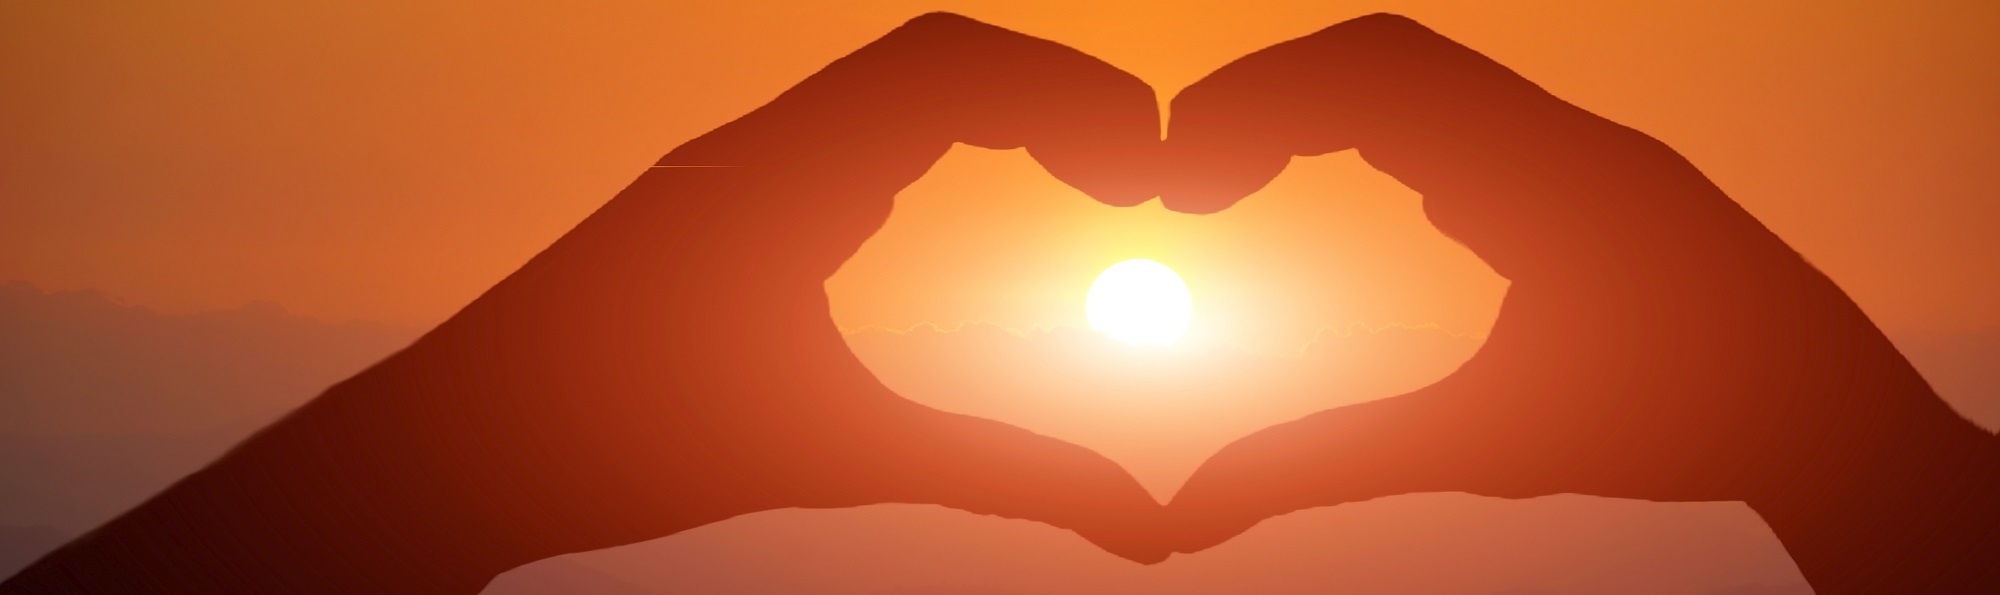 Graphic showing hands making shape of a heart around the setting sun.